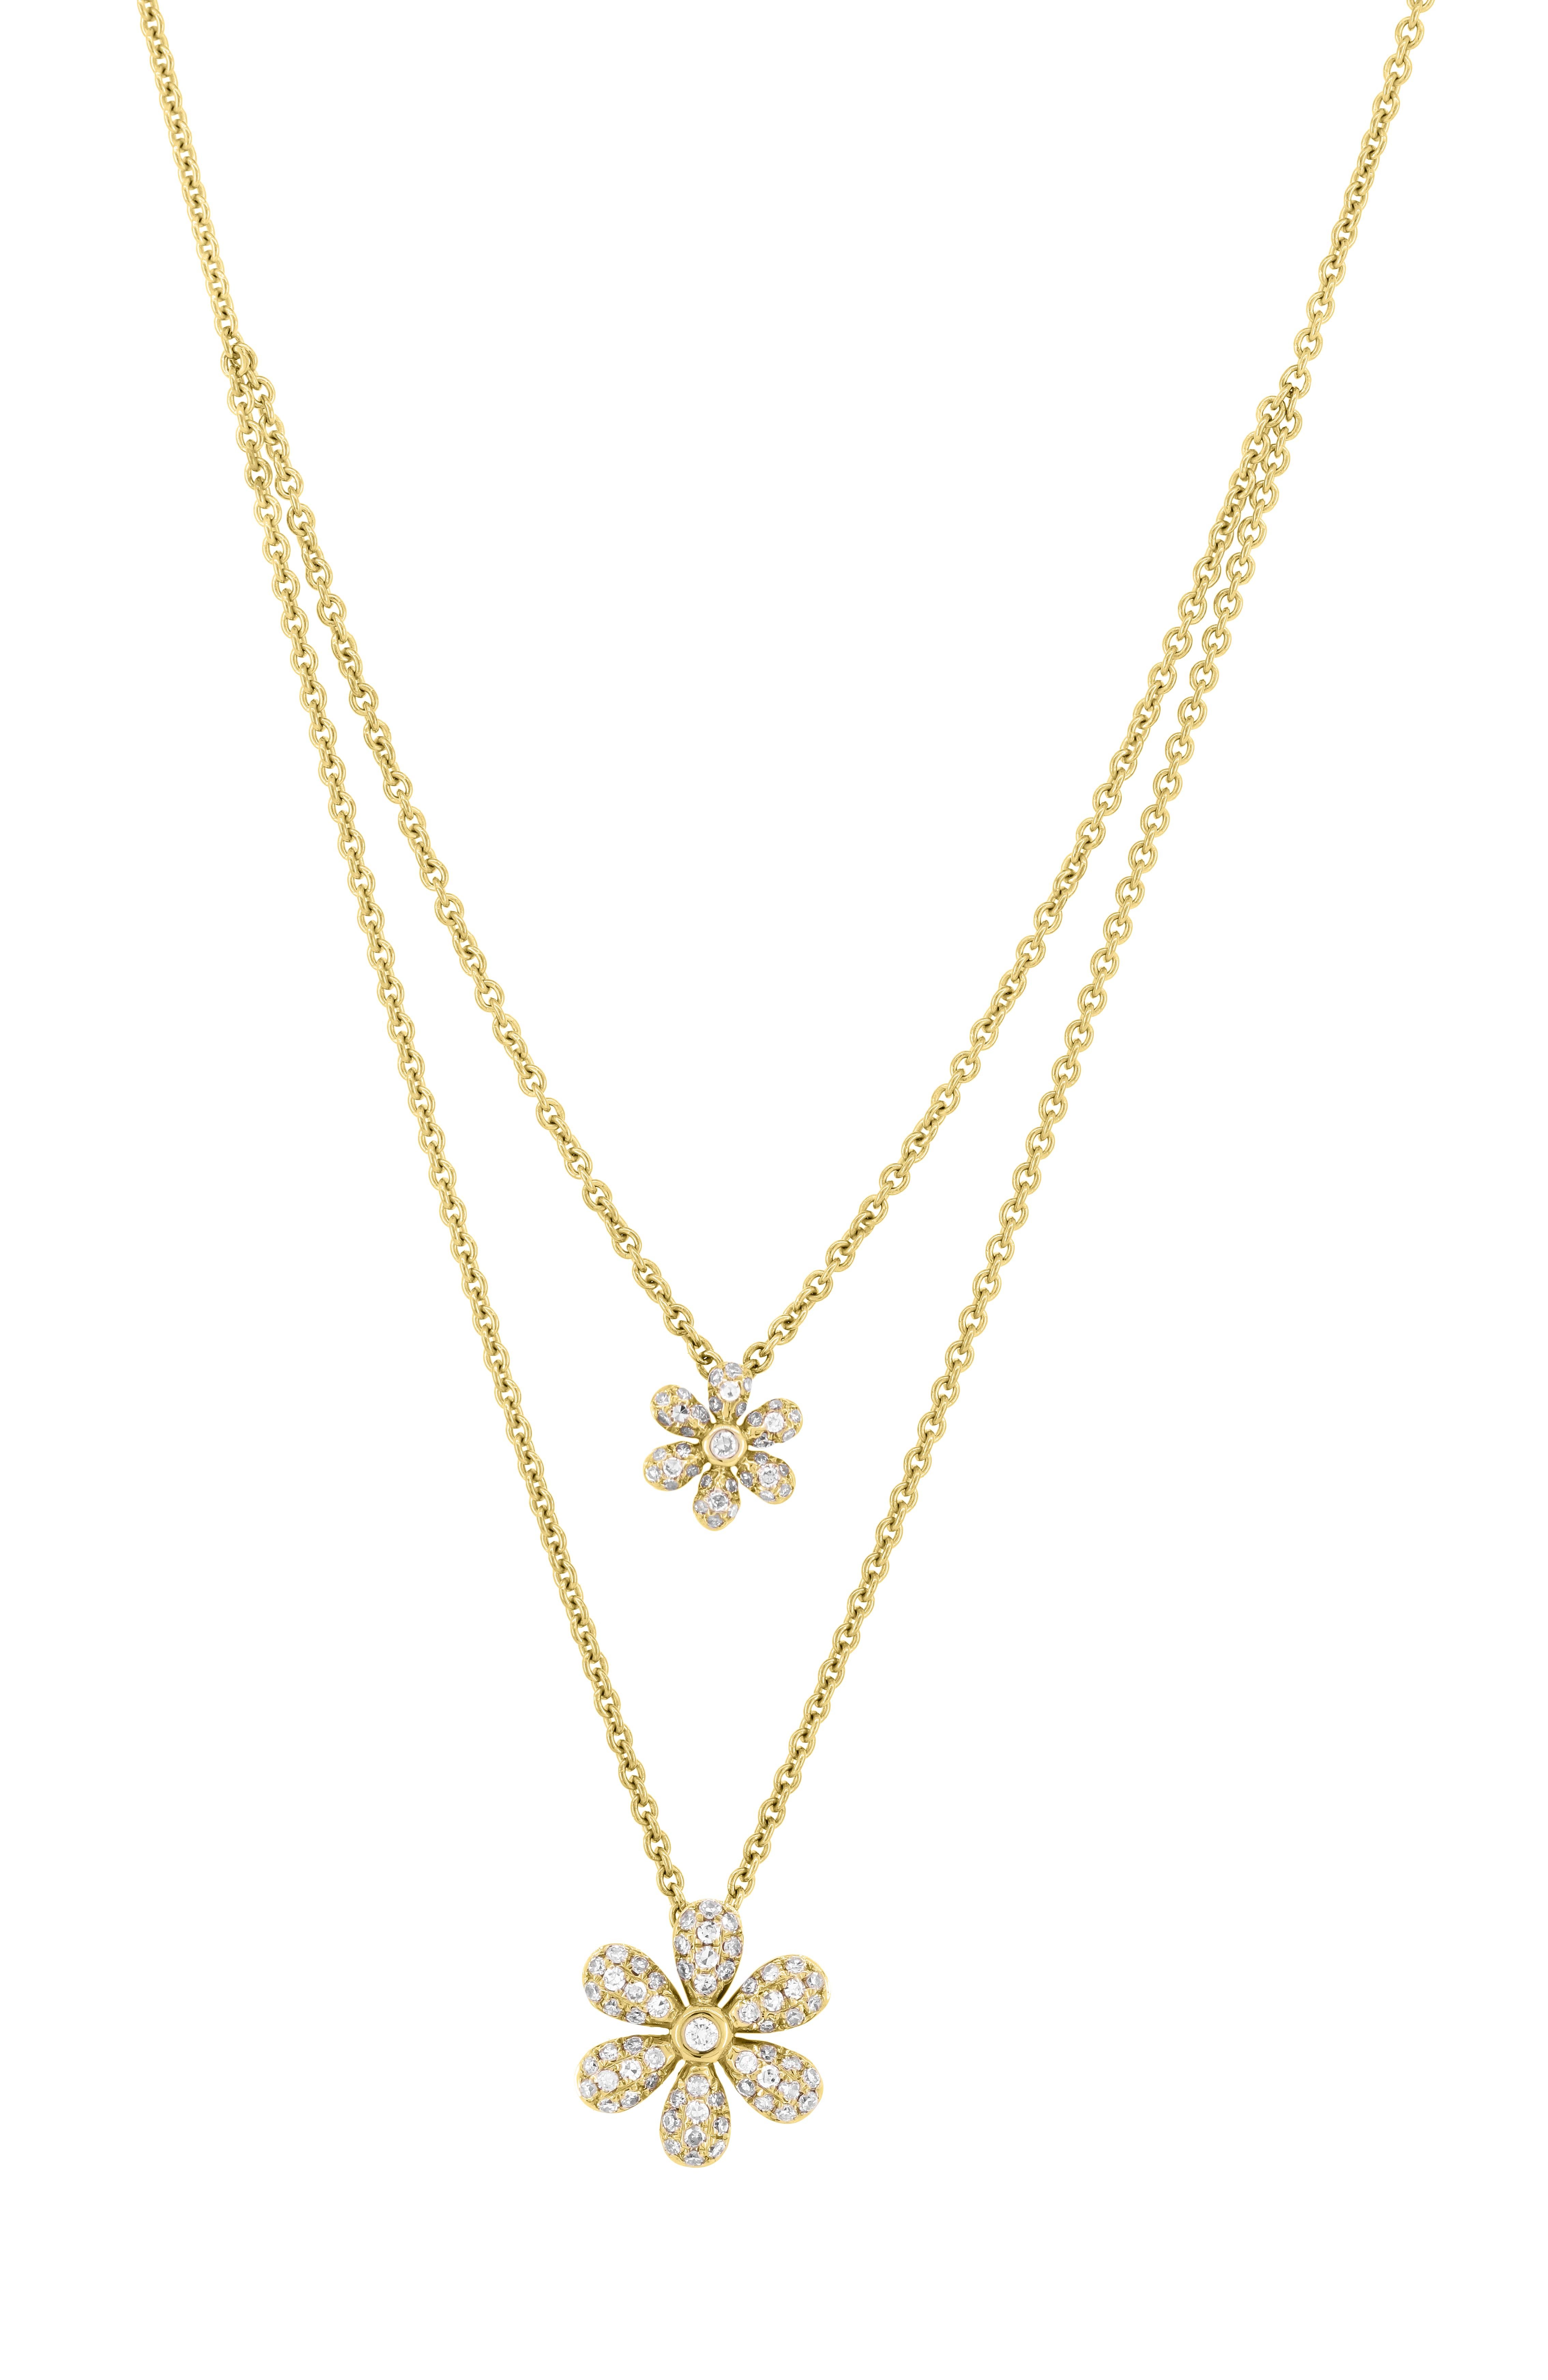 With its excellent balance of richness and imagination, this Luxle double-strand necklace will melt your heart. Better than fresh flowers, this necklace blooms with two flowers sparked by .24 ct. t.w. diamonds in polished 18k yellow gold. The flower